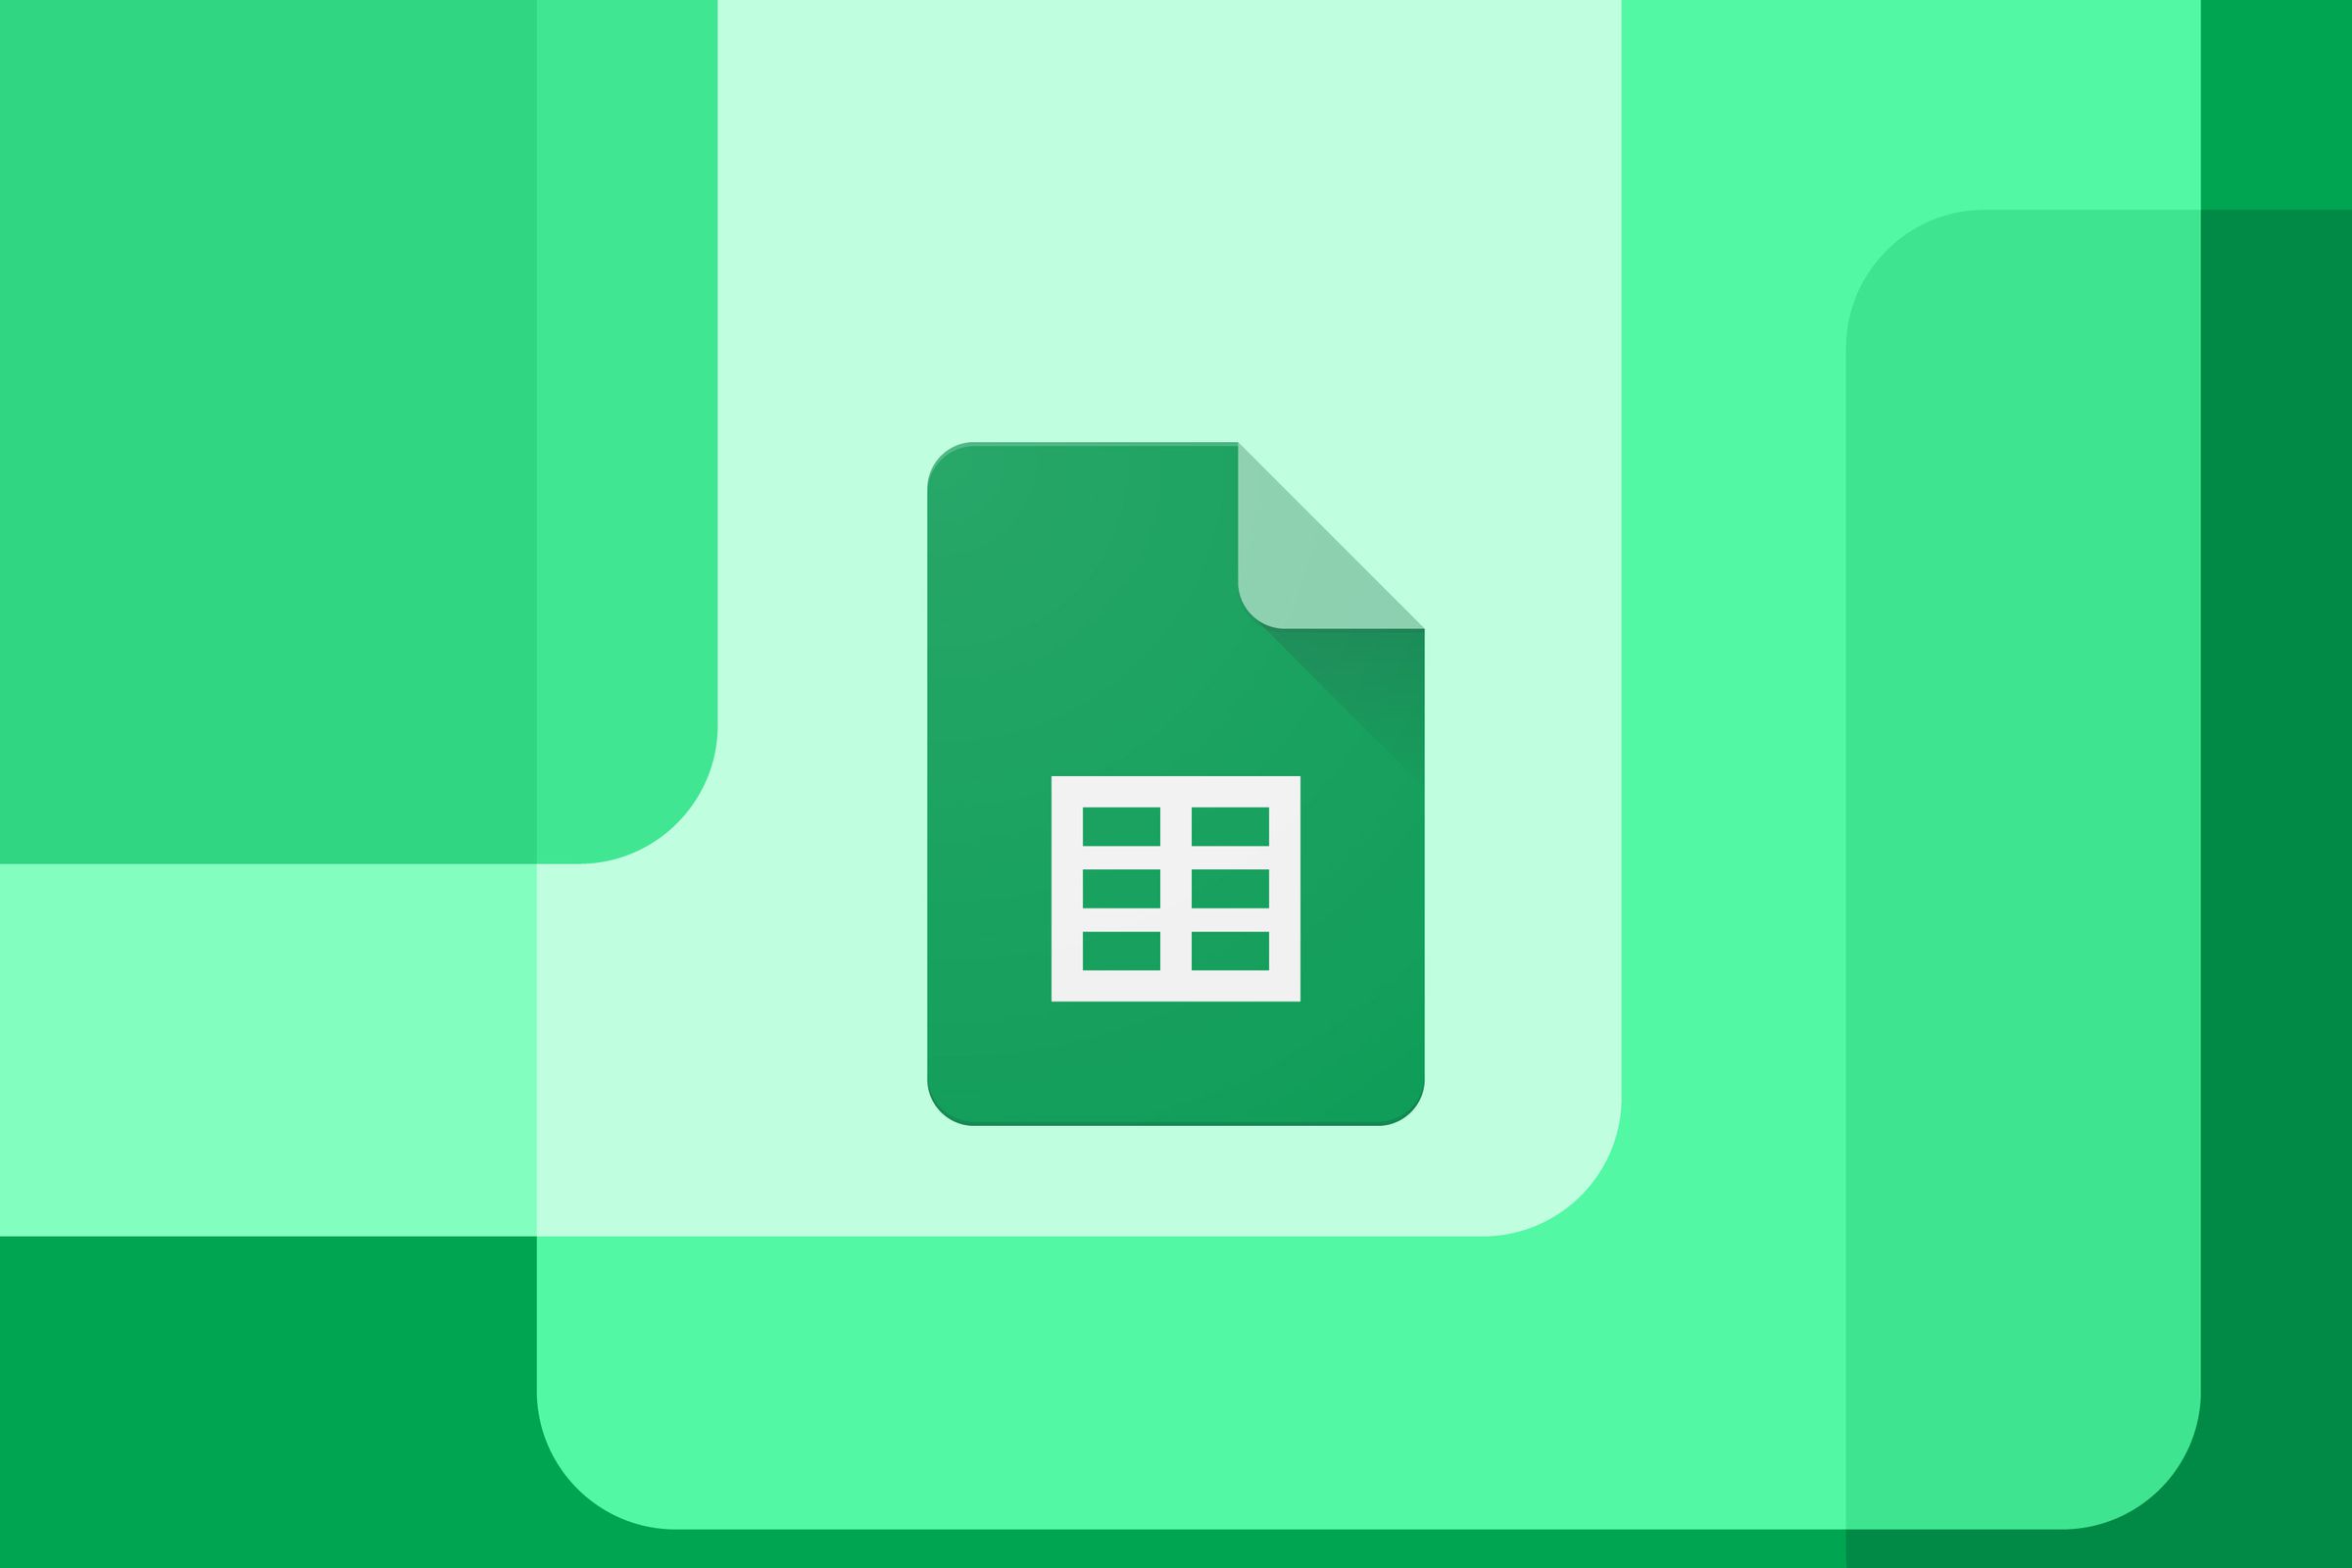 Google Sheets’ new formatting feature has Excel switchers excited